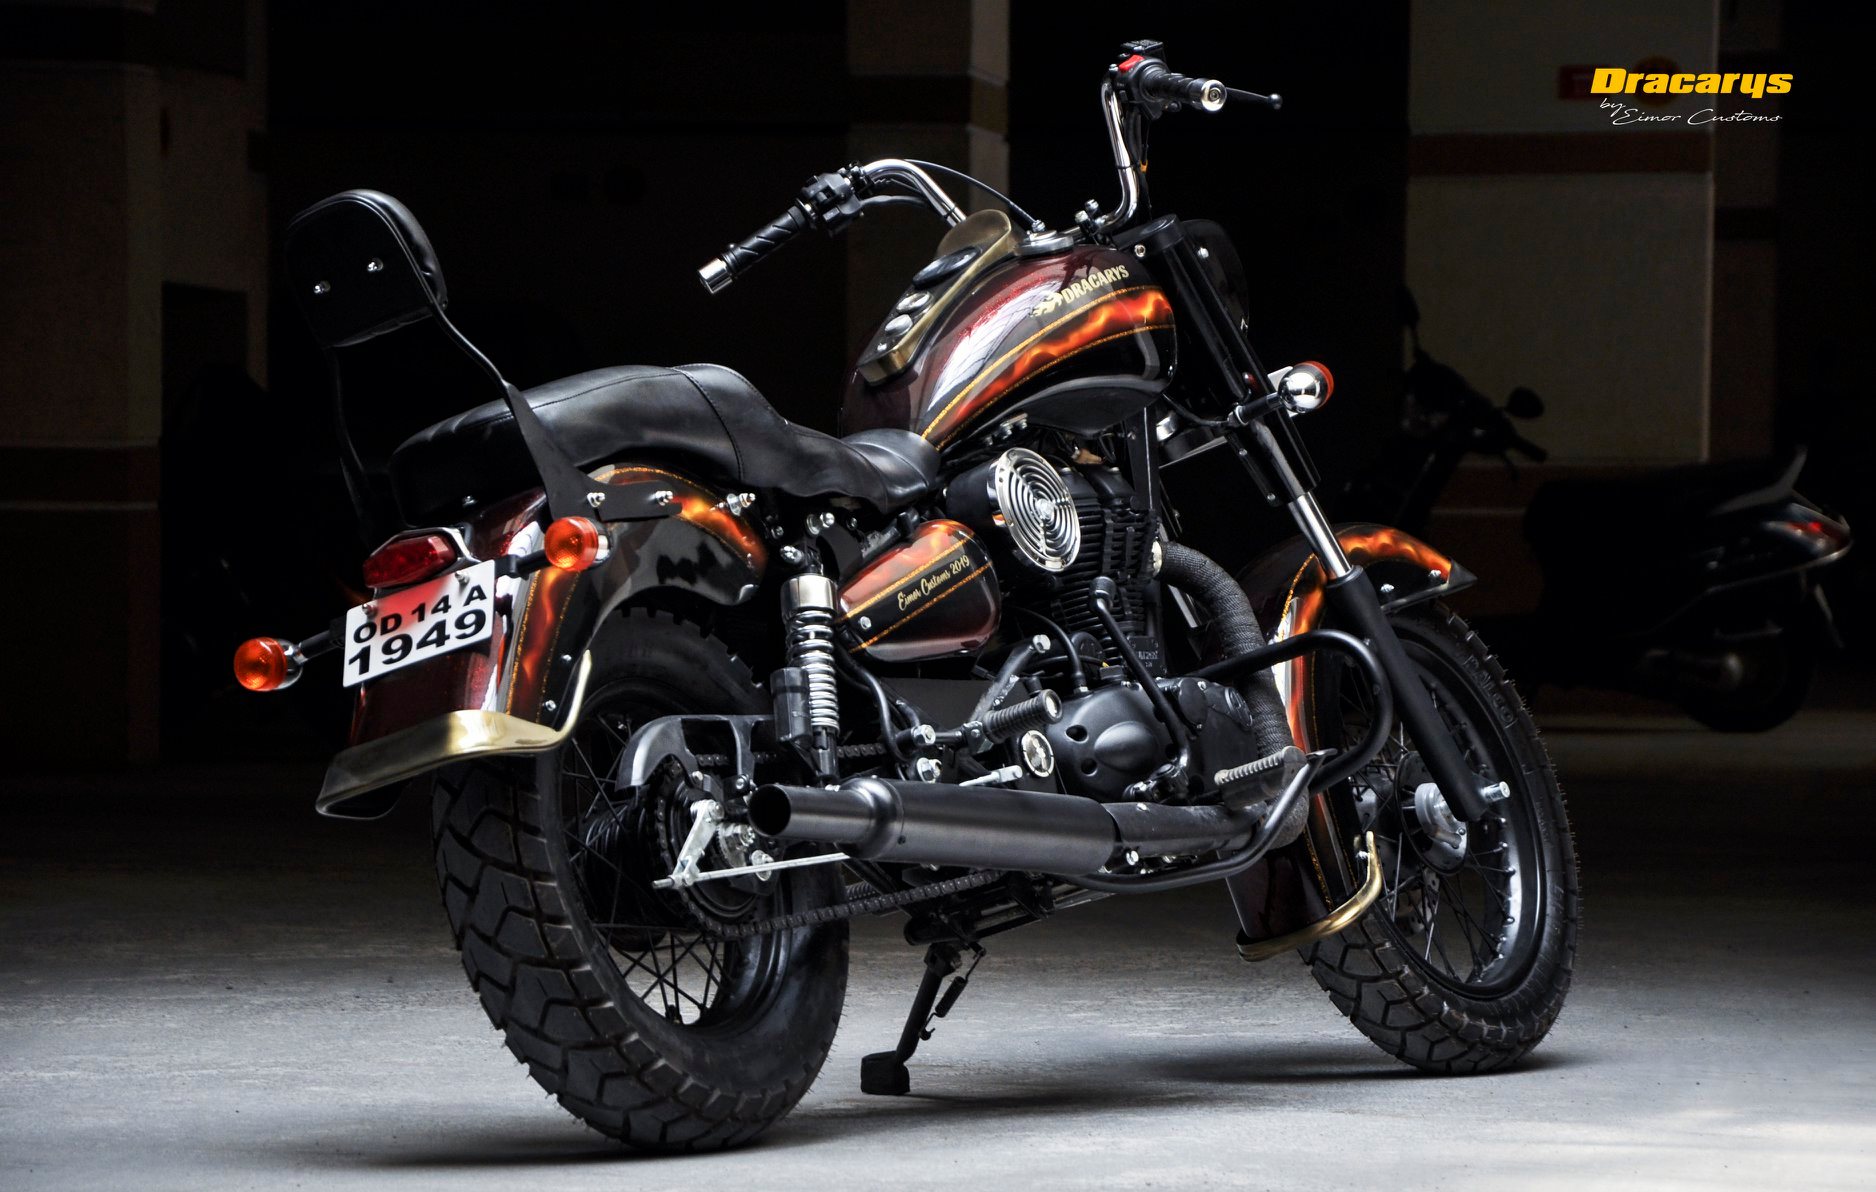 Royal Enfield Bullet 'Dracarys' Special Edition Details and Photos - photograph